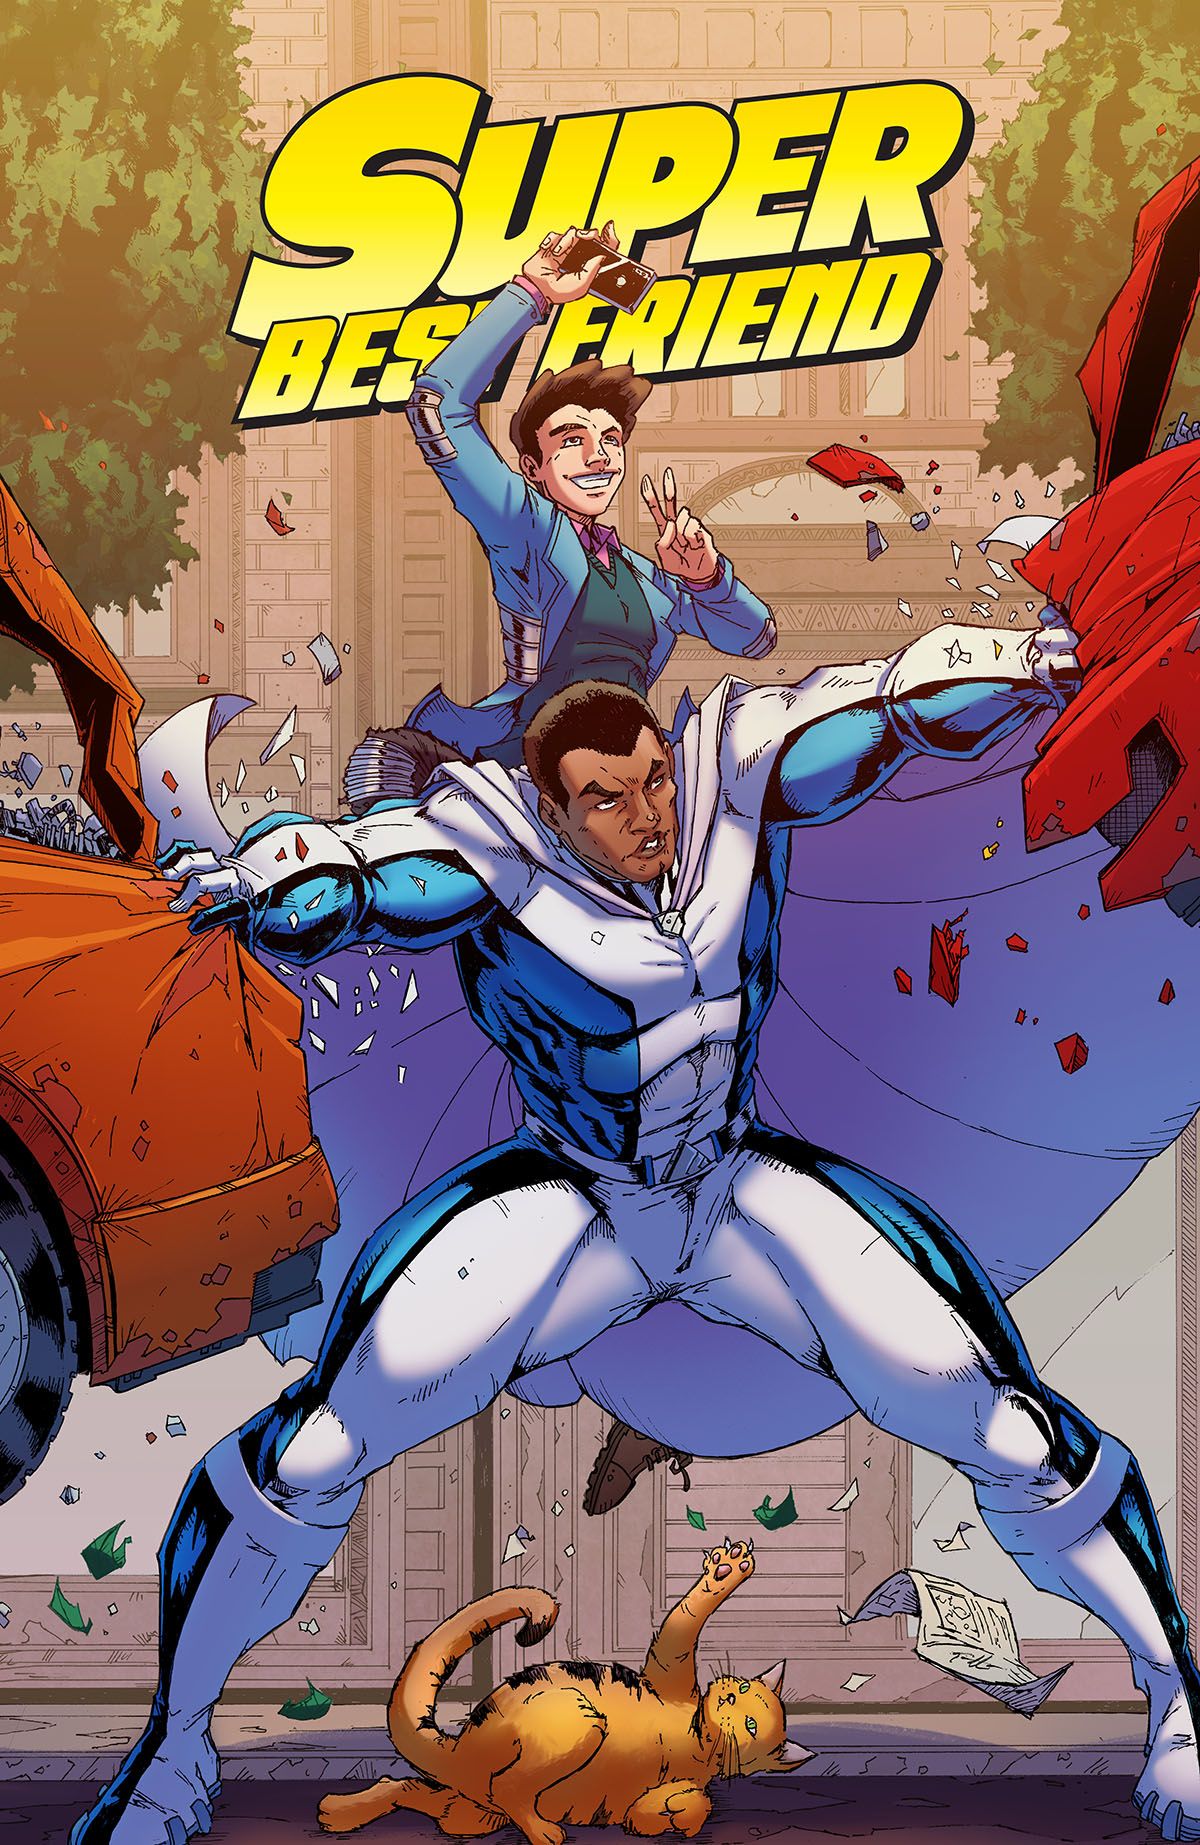 Super Best Friends Cover-TRAVIS MERCER - COLOR with logo preview